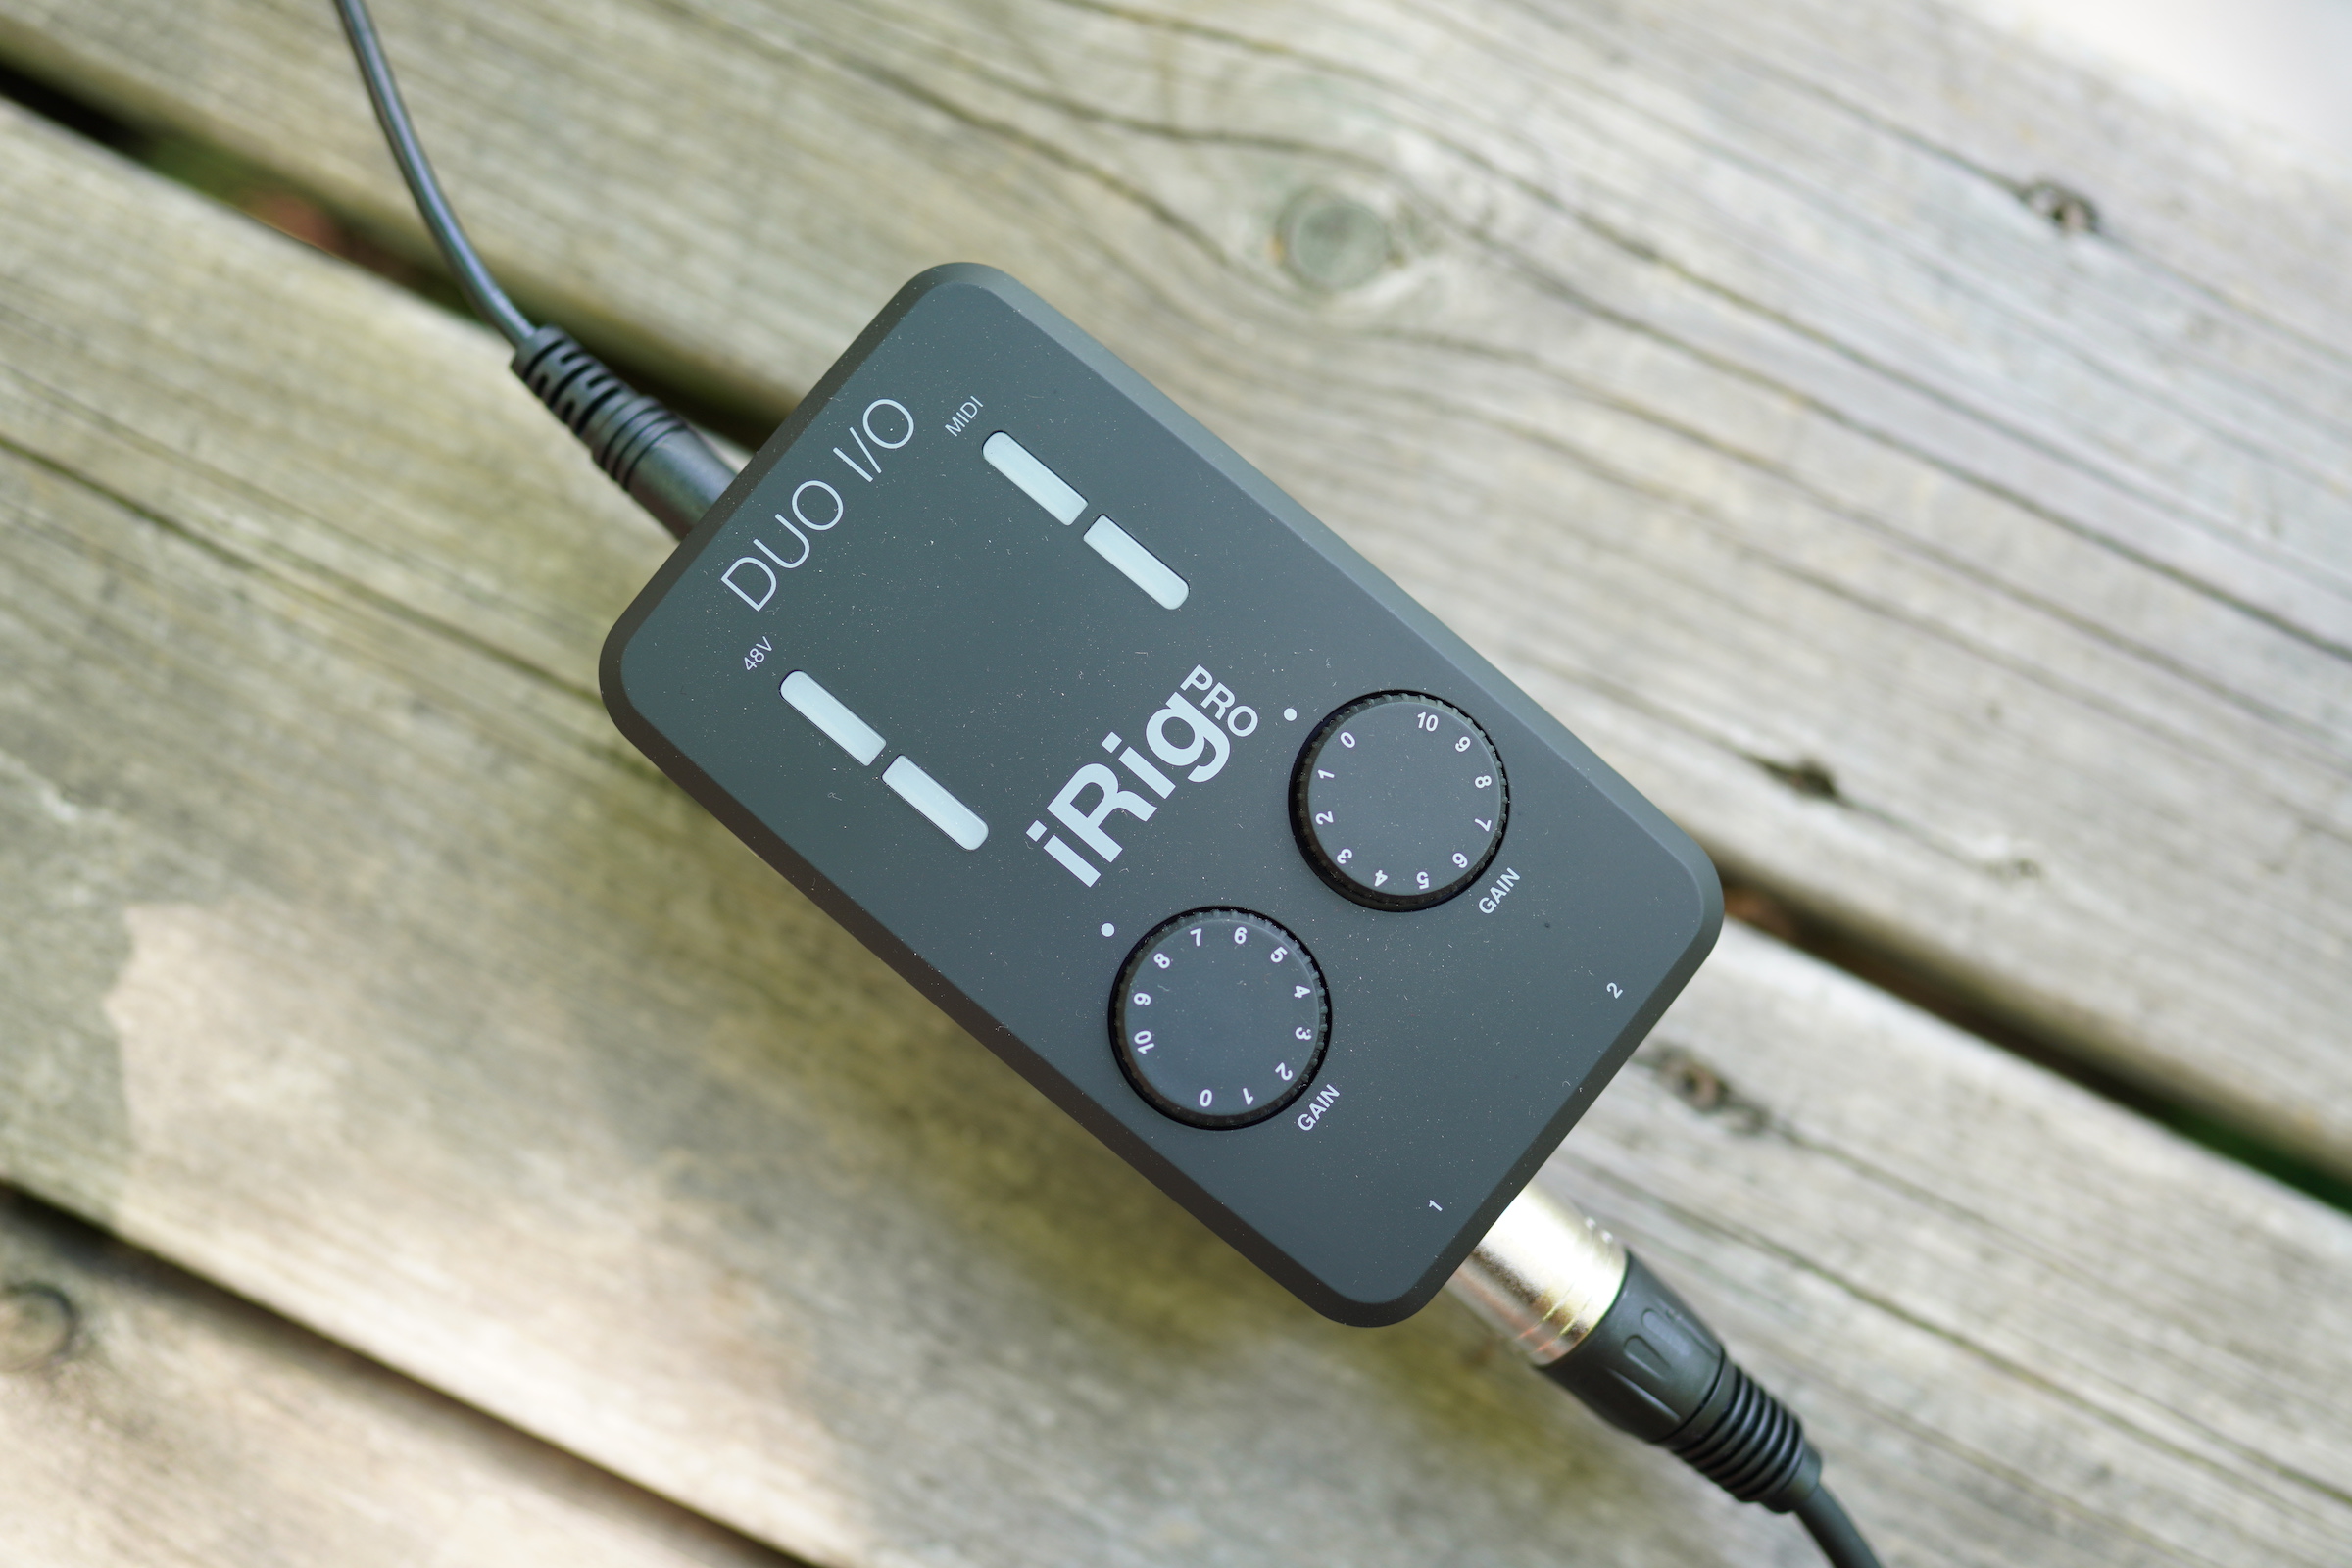 The iRig Pro Duo I/O makes managing advanced audio workflows